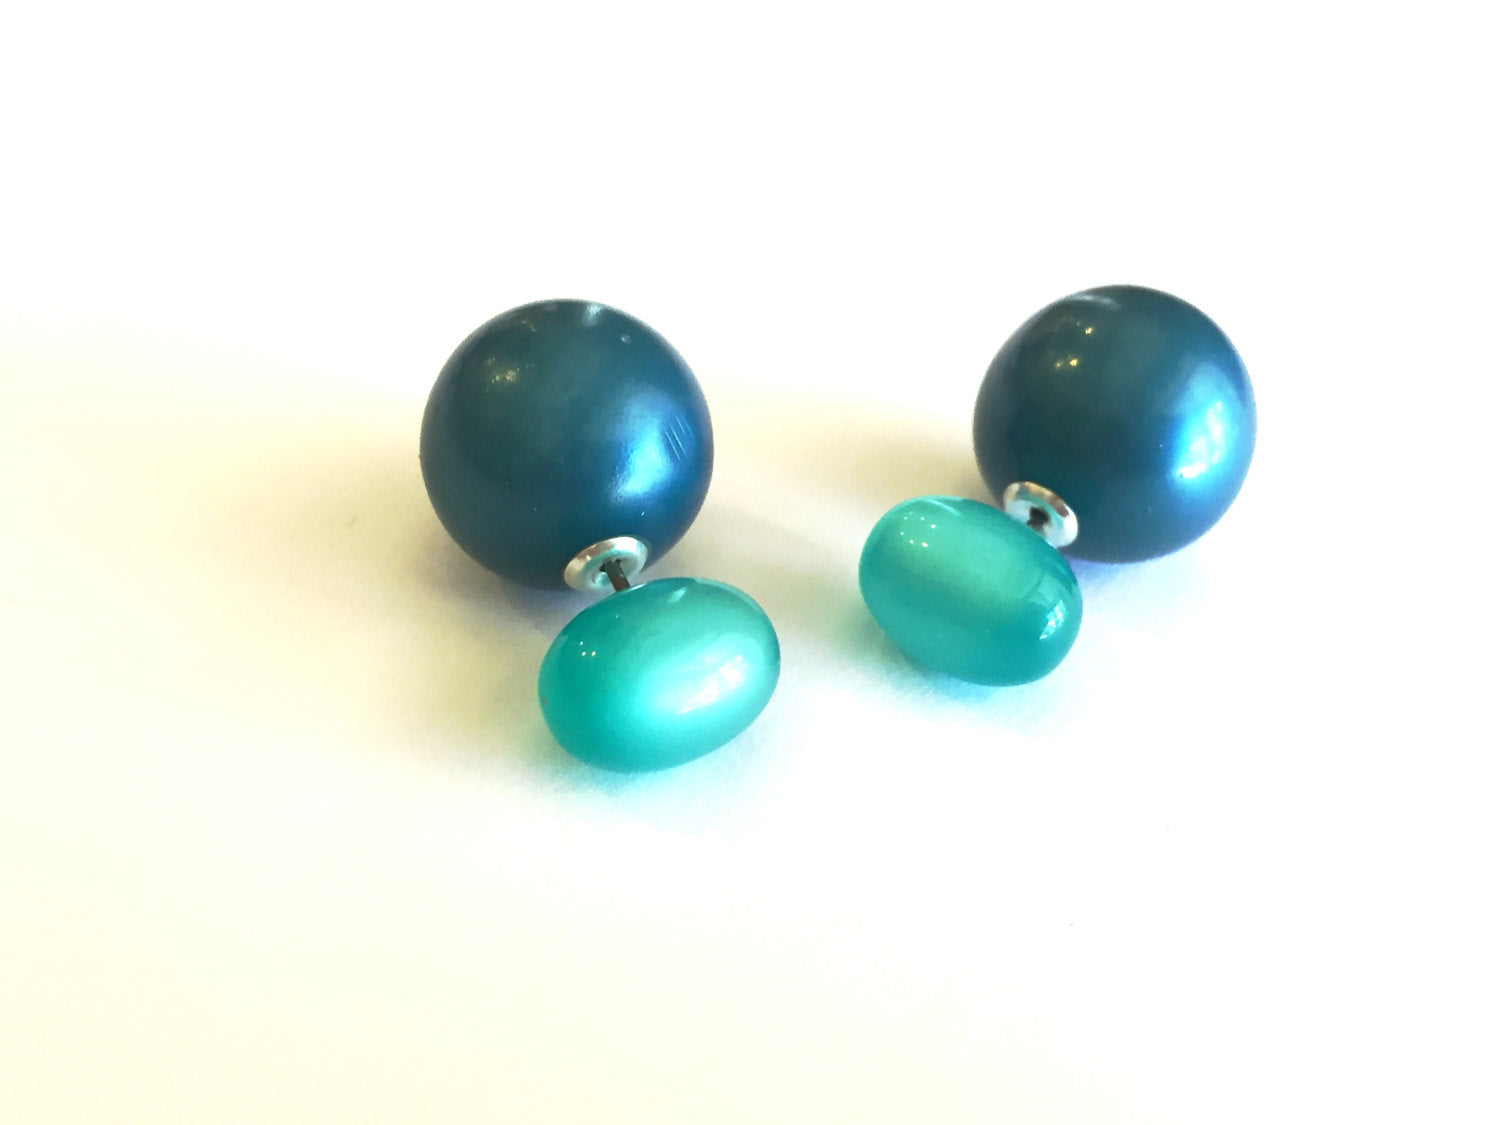 Aqua and Blue Pearl Moonglow 2 Sided Double Stud Earrings